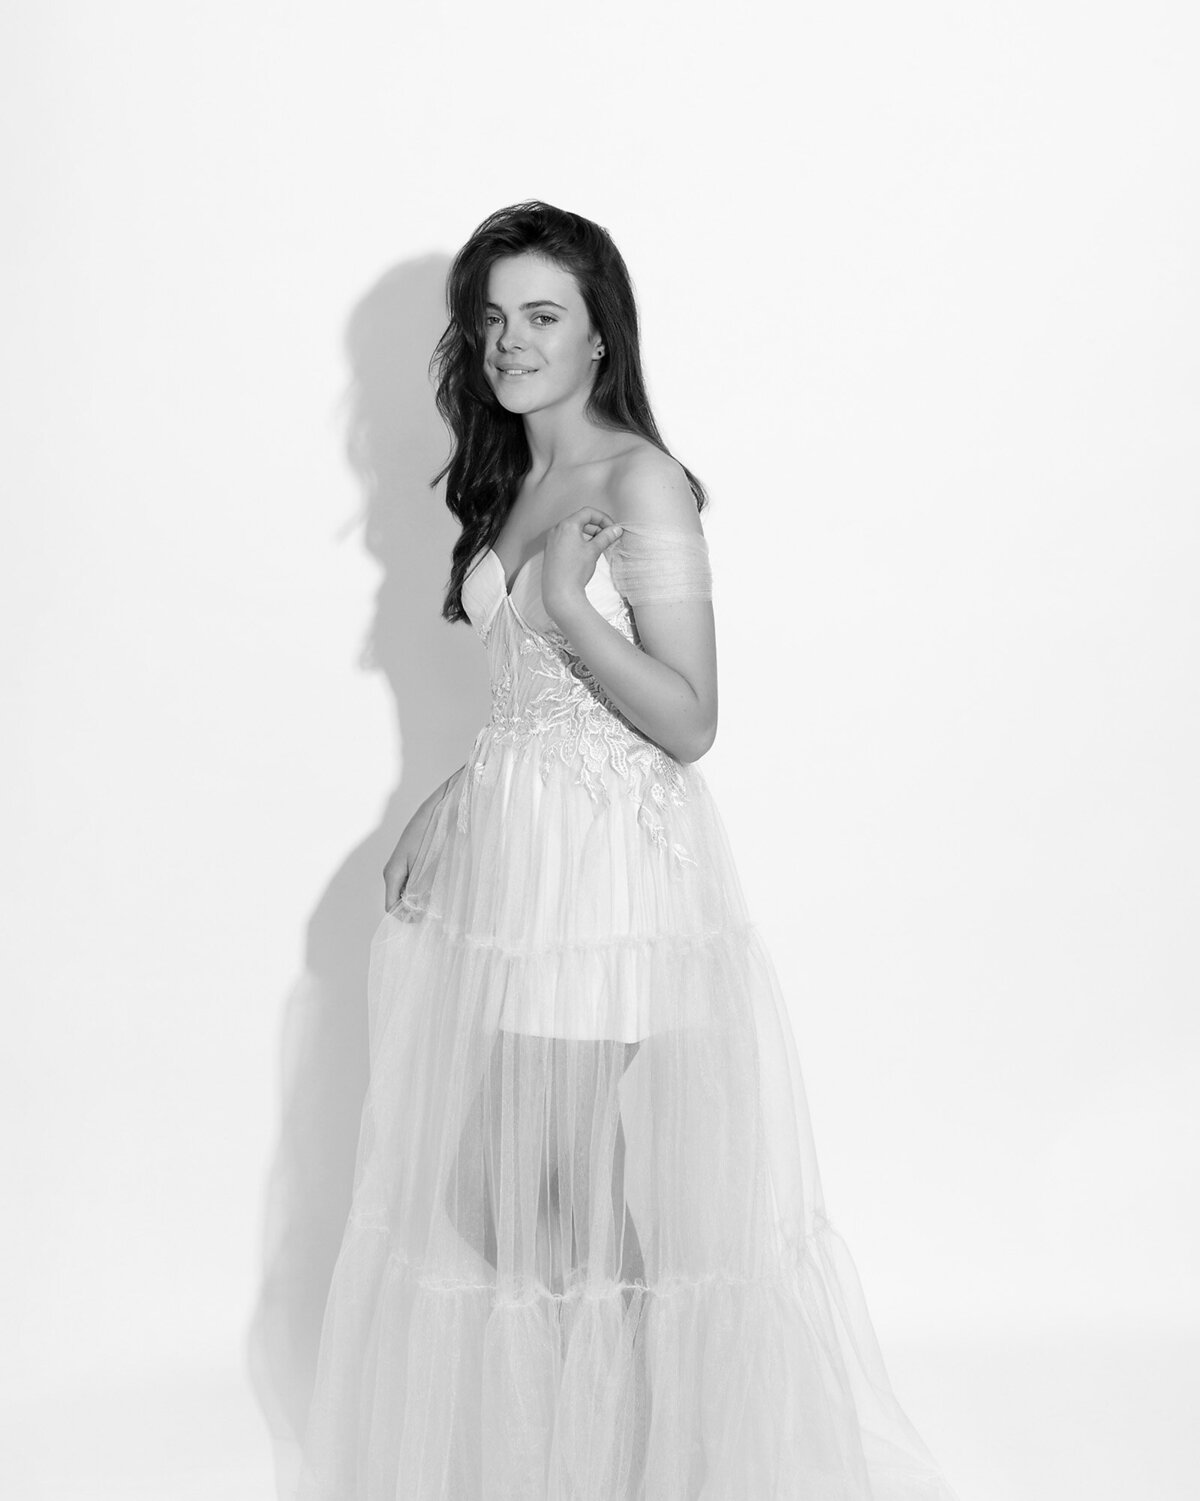 Black and white teen girls portrait wearing gorgeous tulle dress on a simple white background